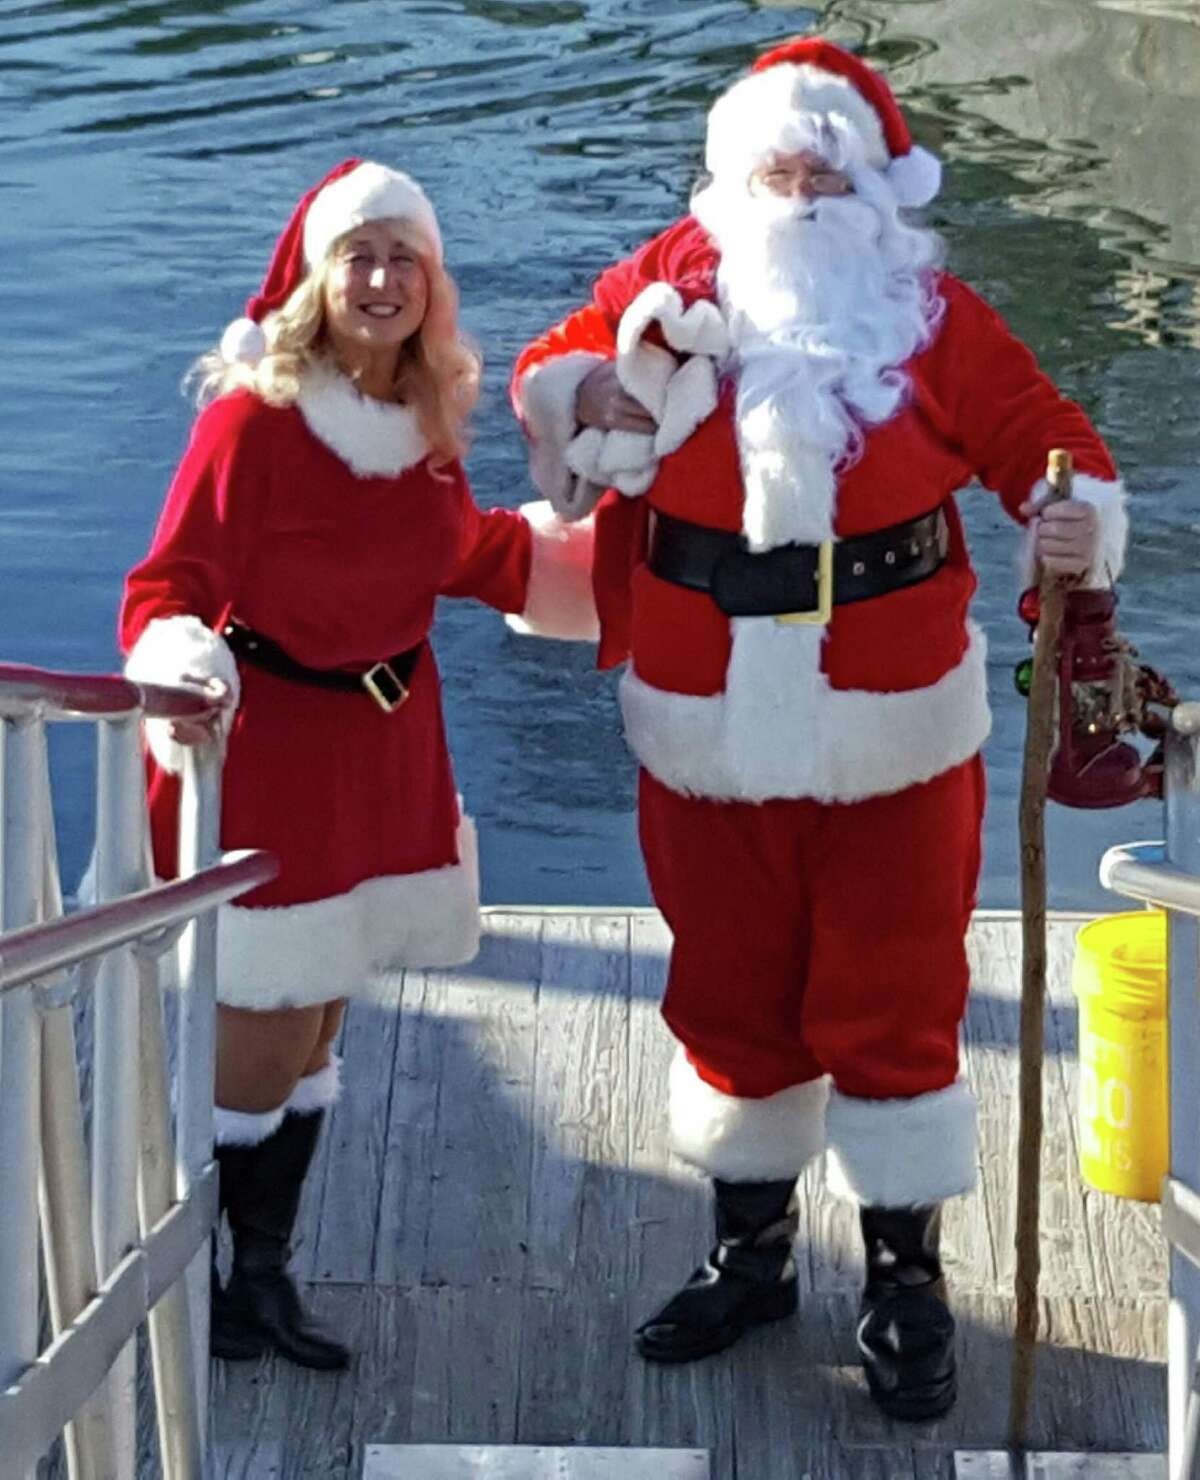 Santa and Mrs. Claus arrive at Greenwich Boat and Yacht Club on Dec. 4 for the Club's annual "Breakfast with Santa."